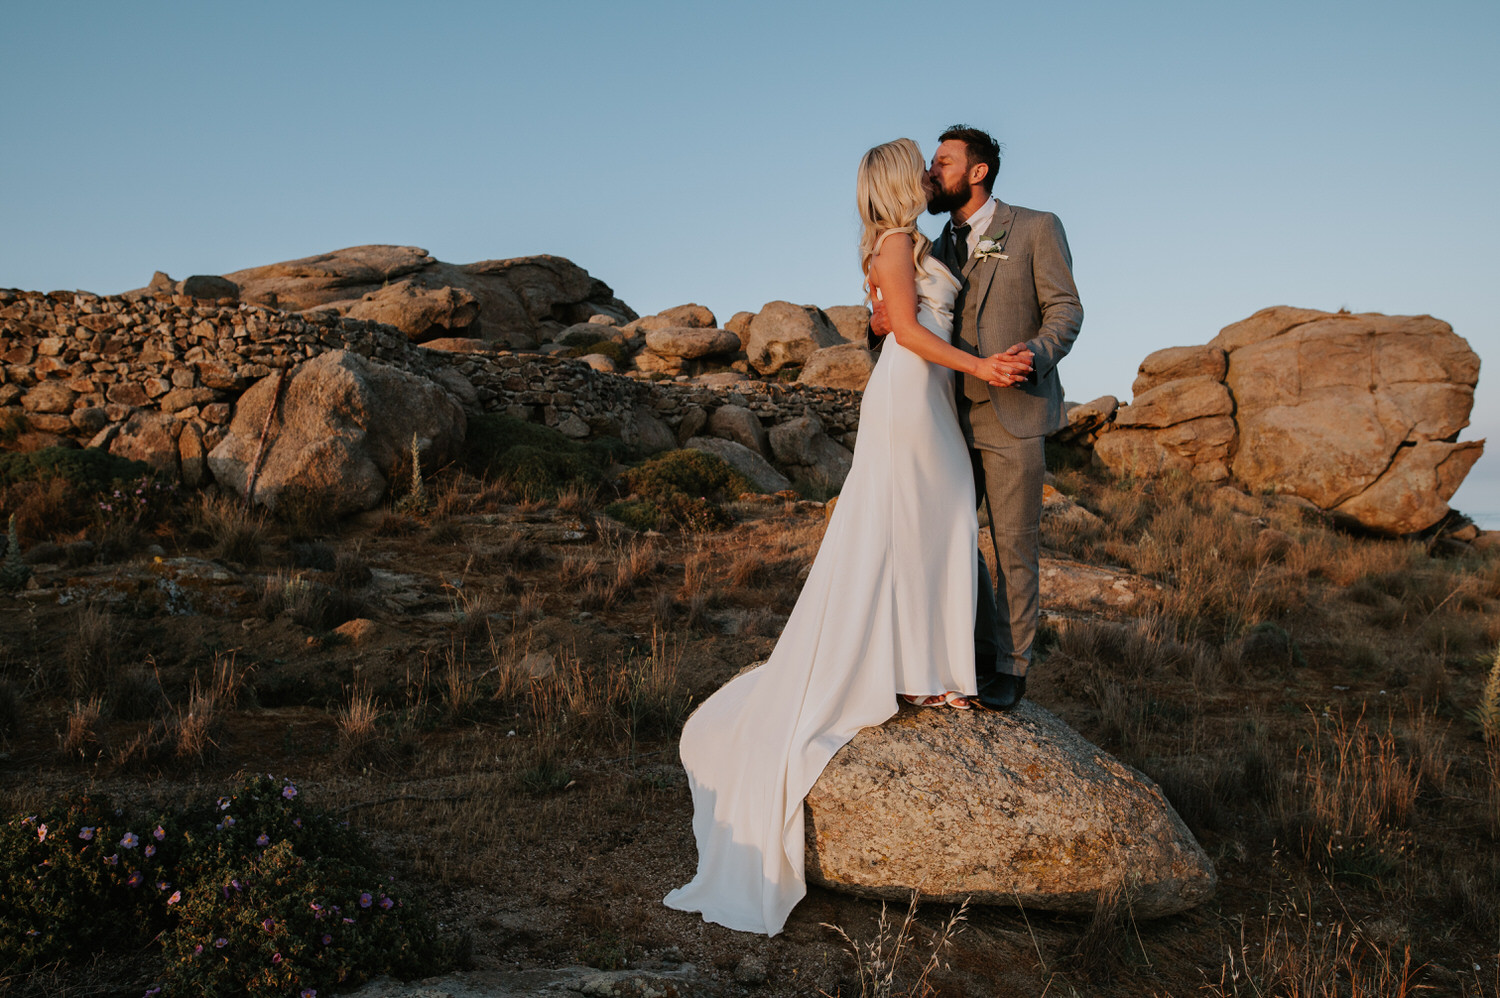 Mykonos wedding photographer: bride and groom kissing holding hands standing on the rock surrounded by the landscape.